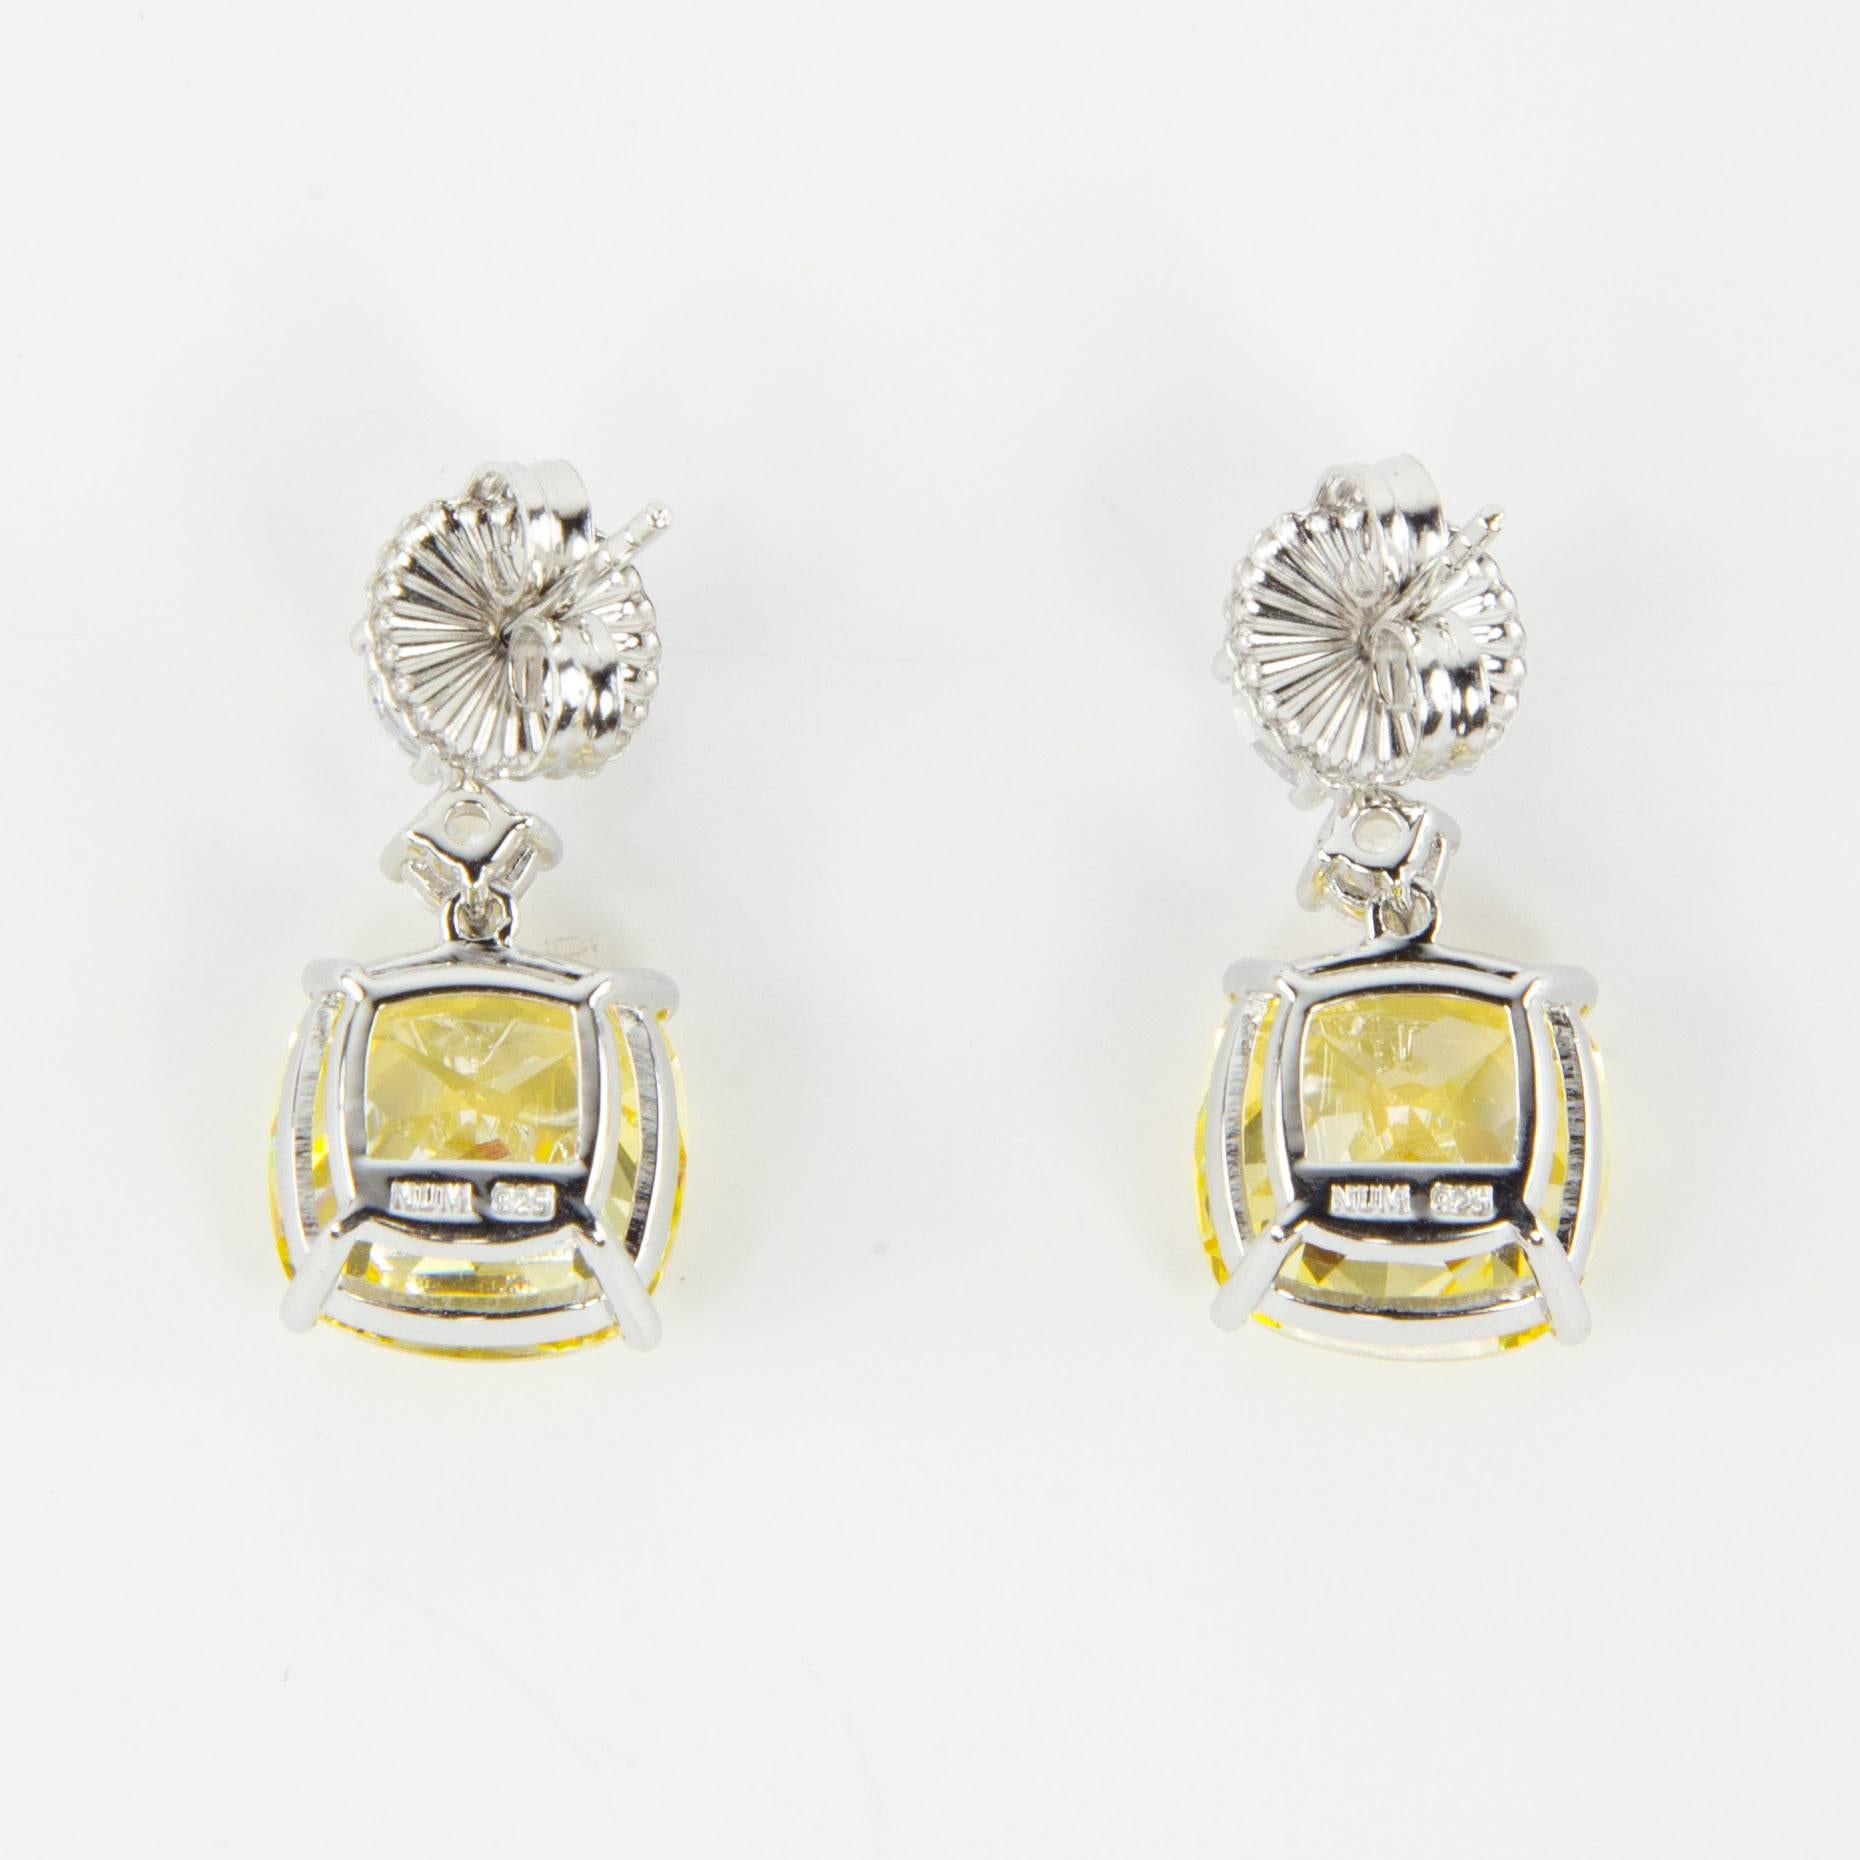 Simply Beautiful…each dangle earring is set with a 6mm and a 4mm round Faux Diamond, suspends a large 22mm square cushion shape faux Yellow Diamond, making a striking statement! All hand set in Sterling Silver. Approx. total length 1